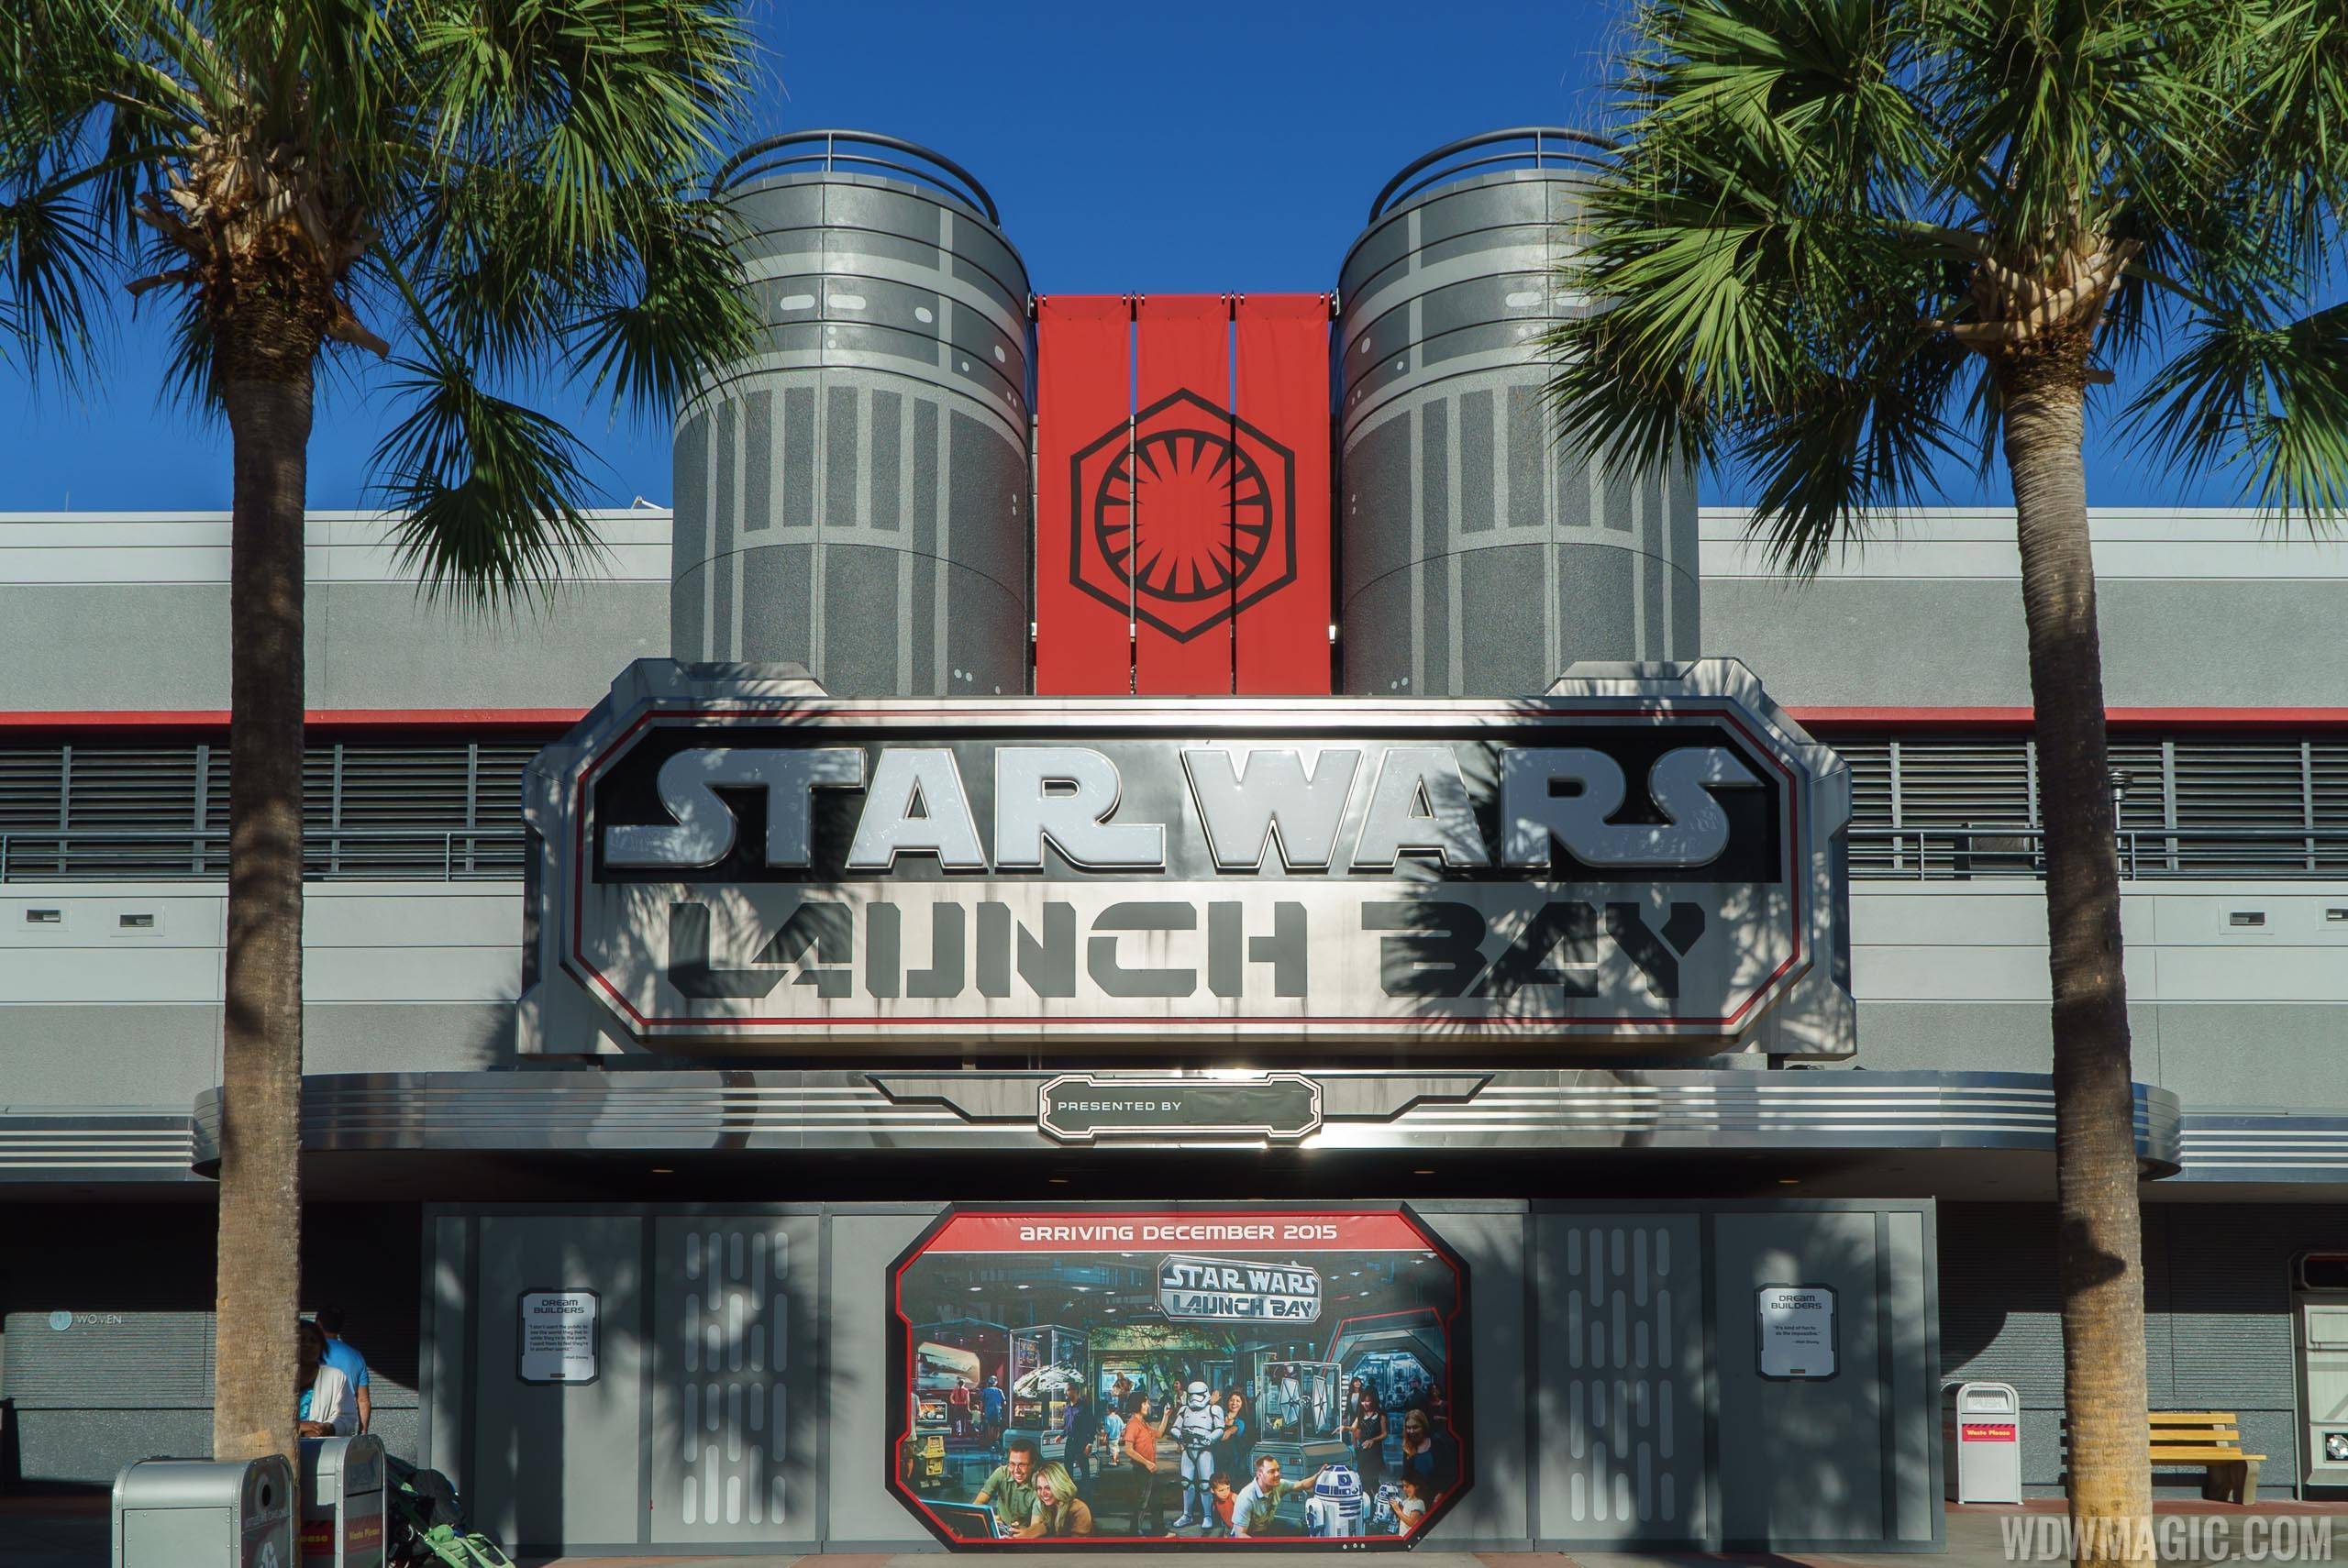 PHOTOS - Star Wars Launch Bay exterior complete ahead of tomorrow's opening